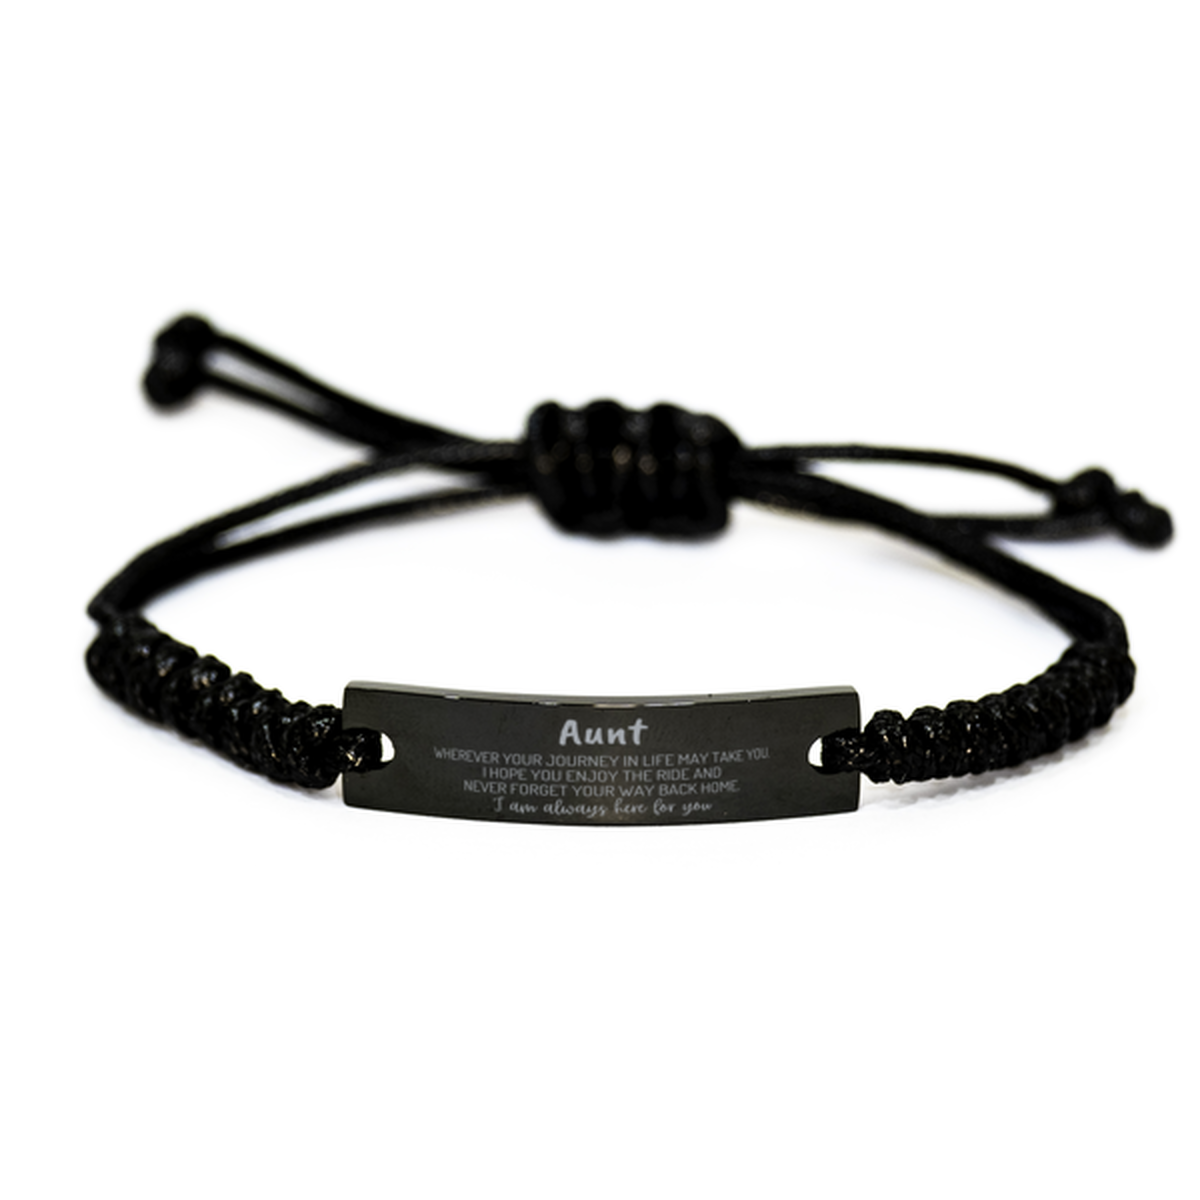 Aunt wherever your journey in life may take you, I am always here for you Aunt Black Rope Bracelet, Awesome Christmas Gifts For Aunt, Aunt Birthday Gifts for Men Women Family Loved One